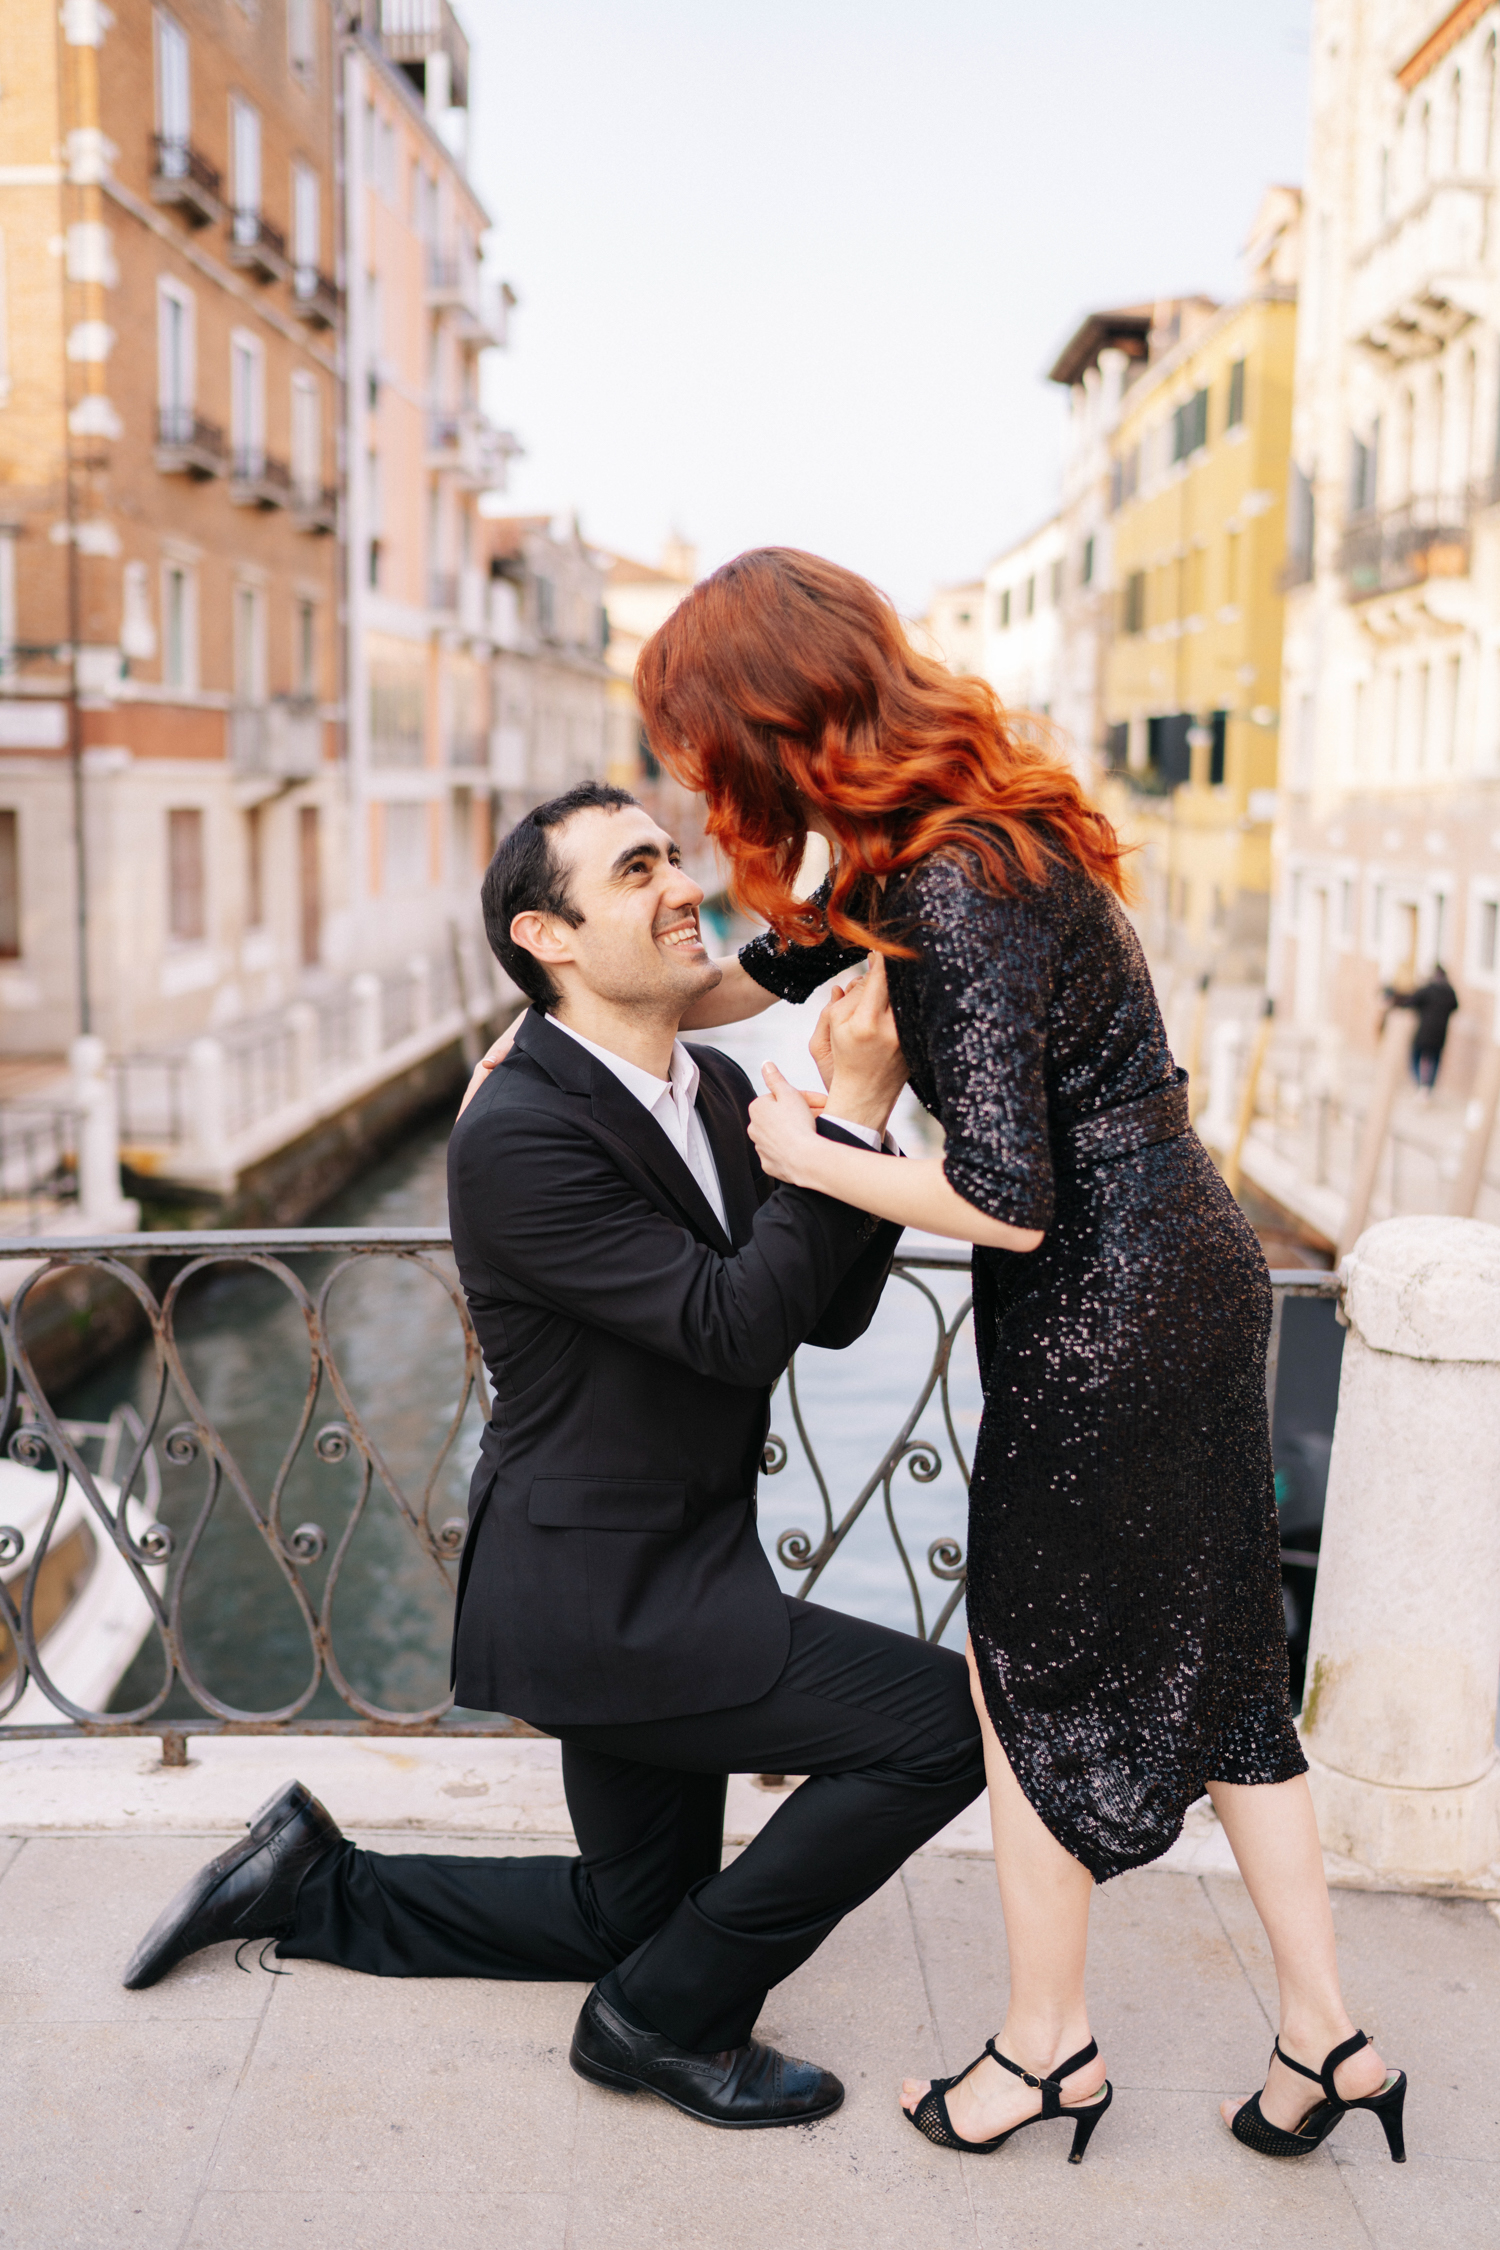 Capture the moment forever with Venice's top proposal photographer. Trust us to expertly capture your surprise engagement photoshoot against the stunning backdrop of Venice's canals and historic architecture. Book now for a truly memorable experience.